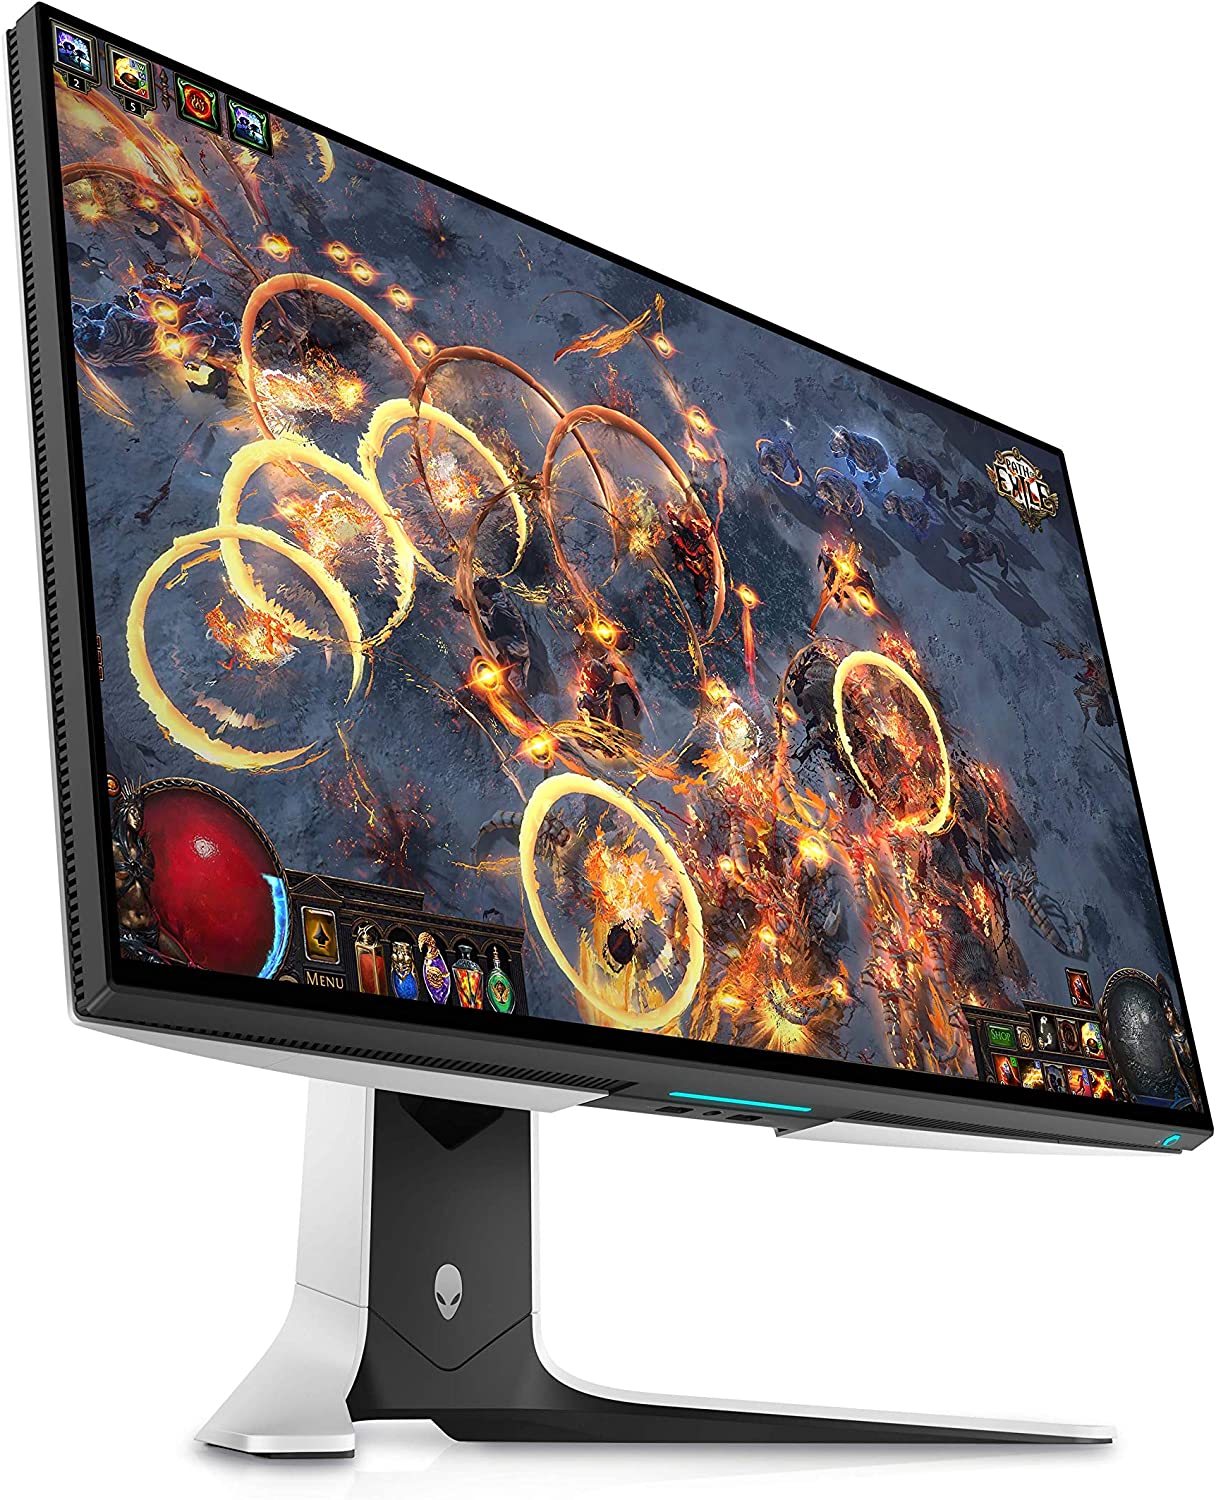 A 1440P white themed monitor for an all-white PC.